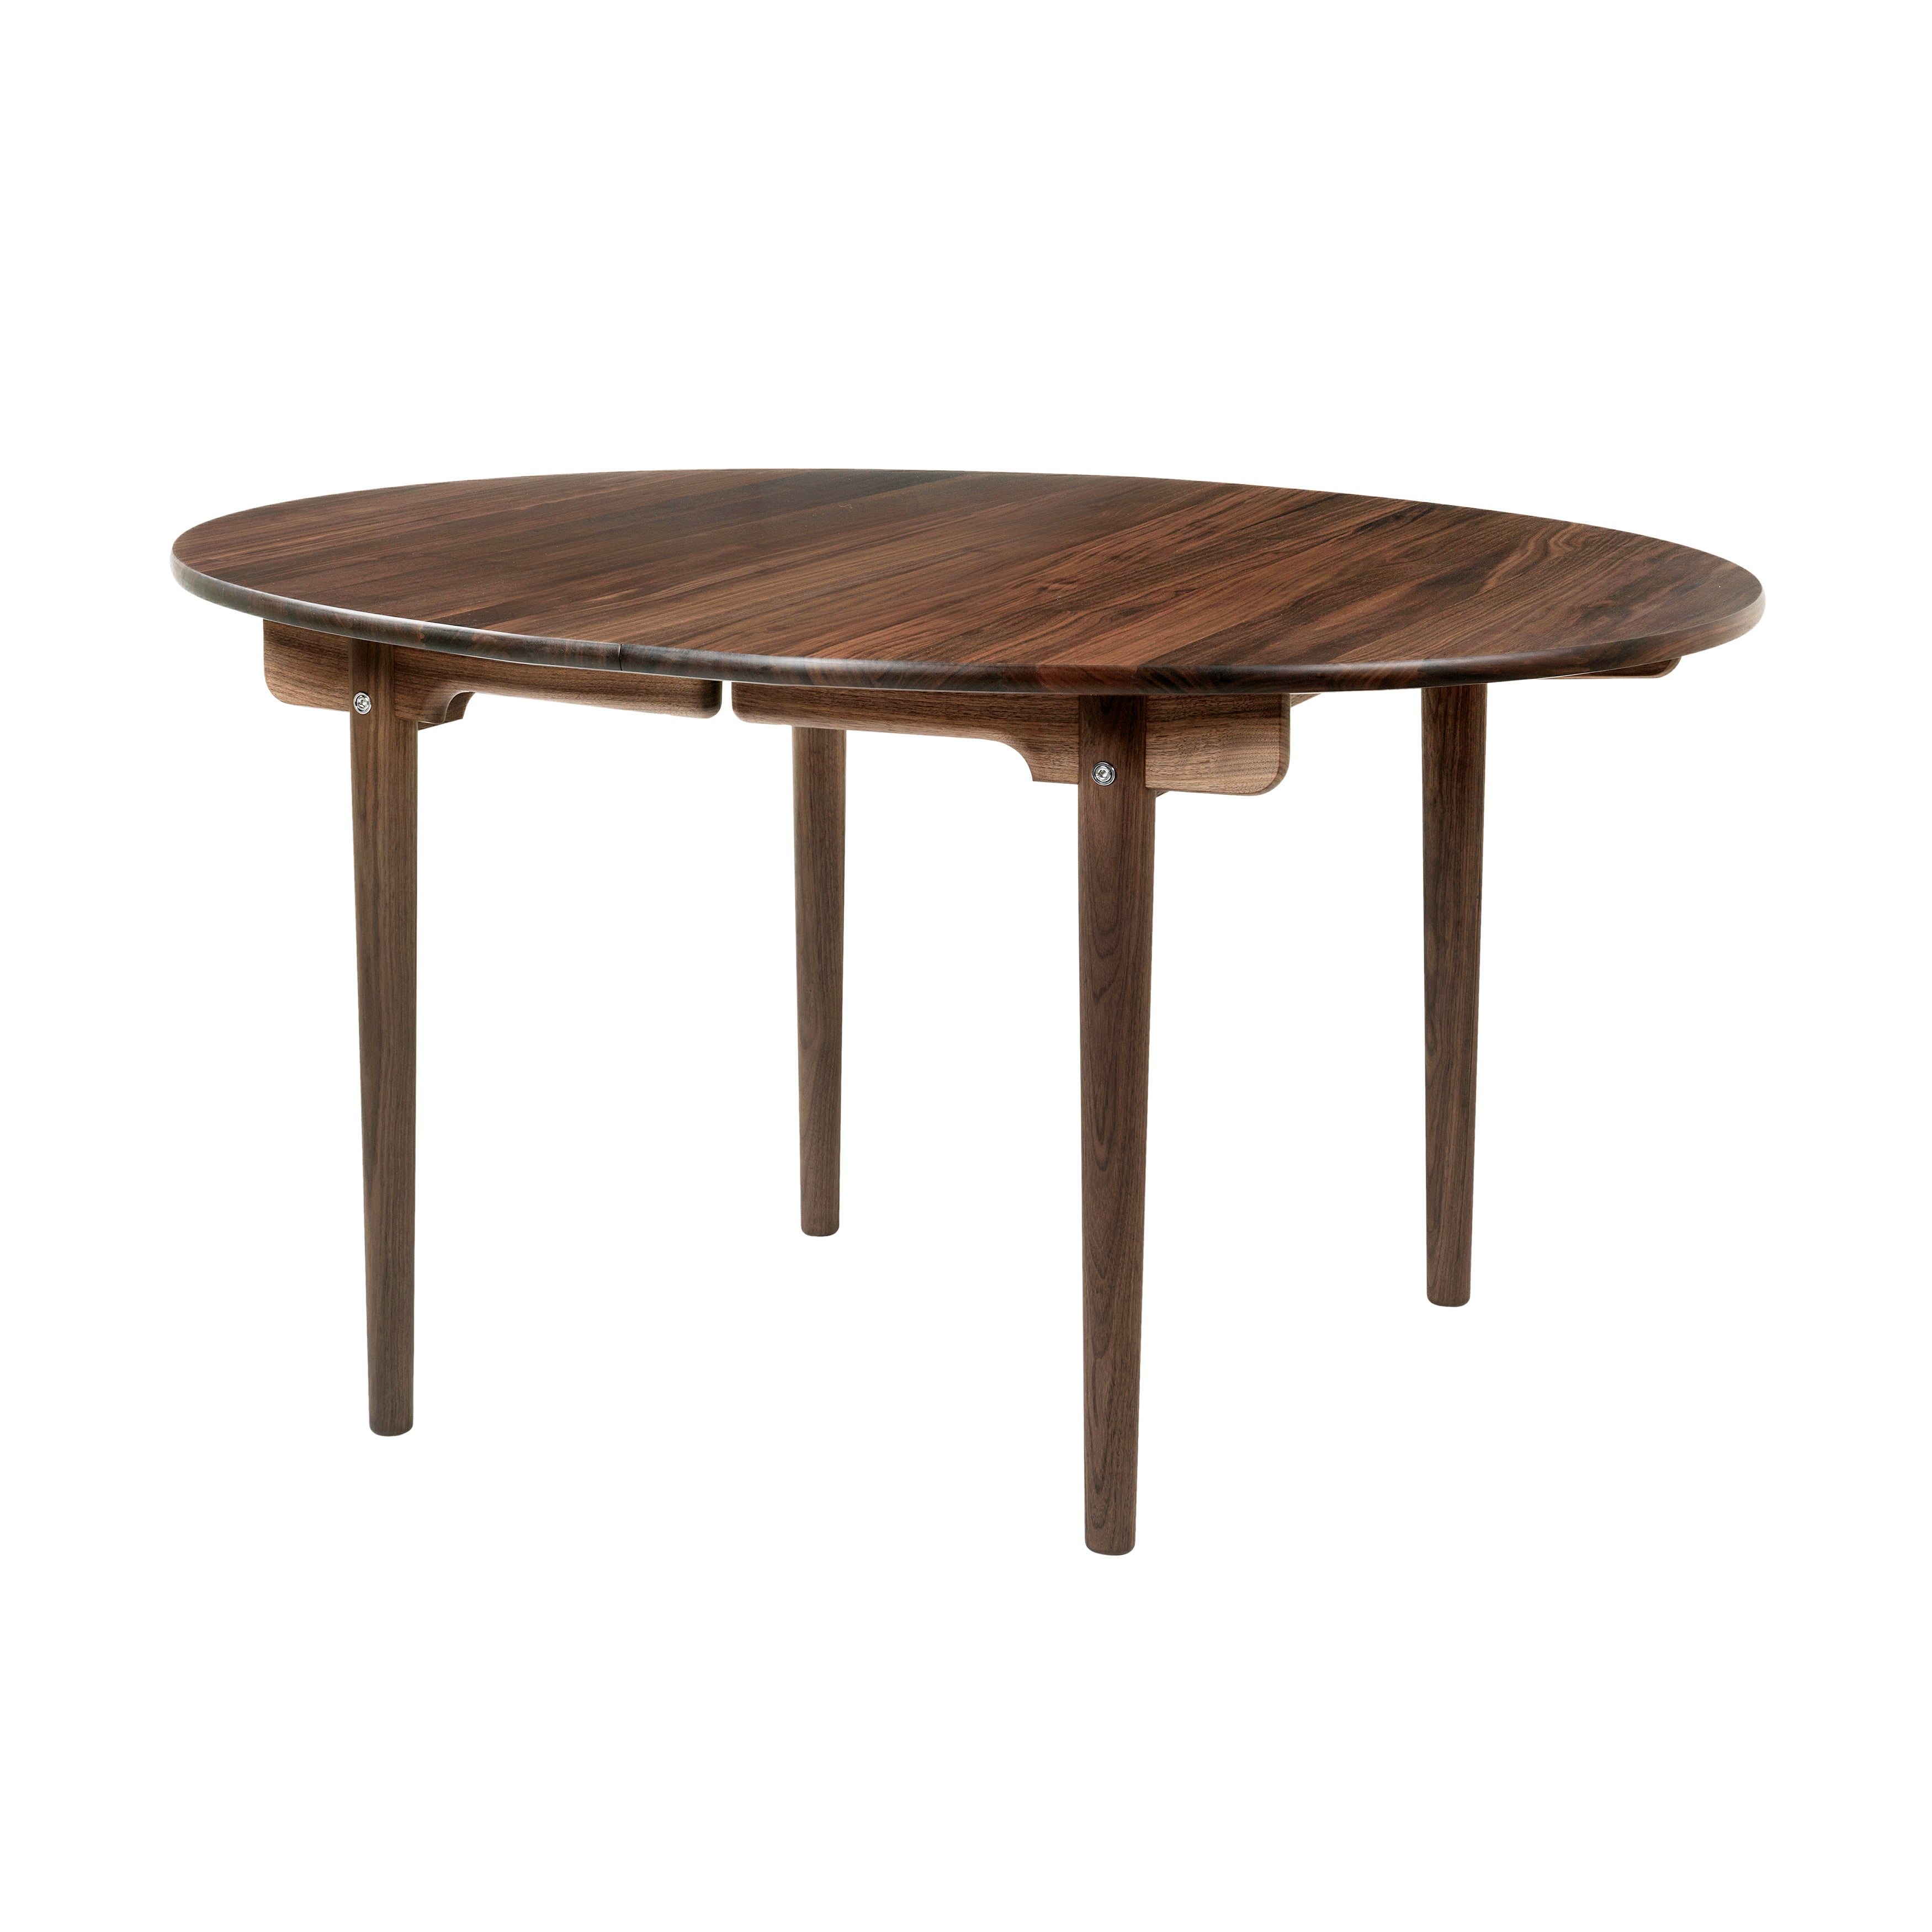 CH337 Dining Table: Oiled Walnut + Without Leaf